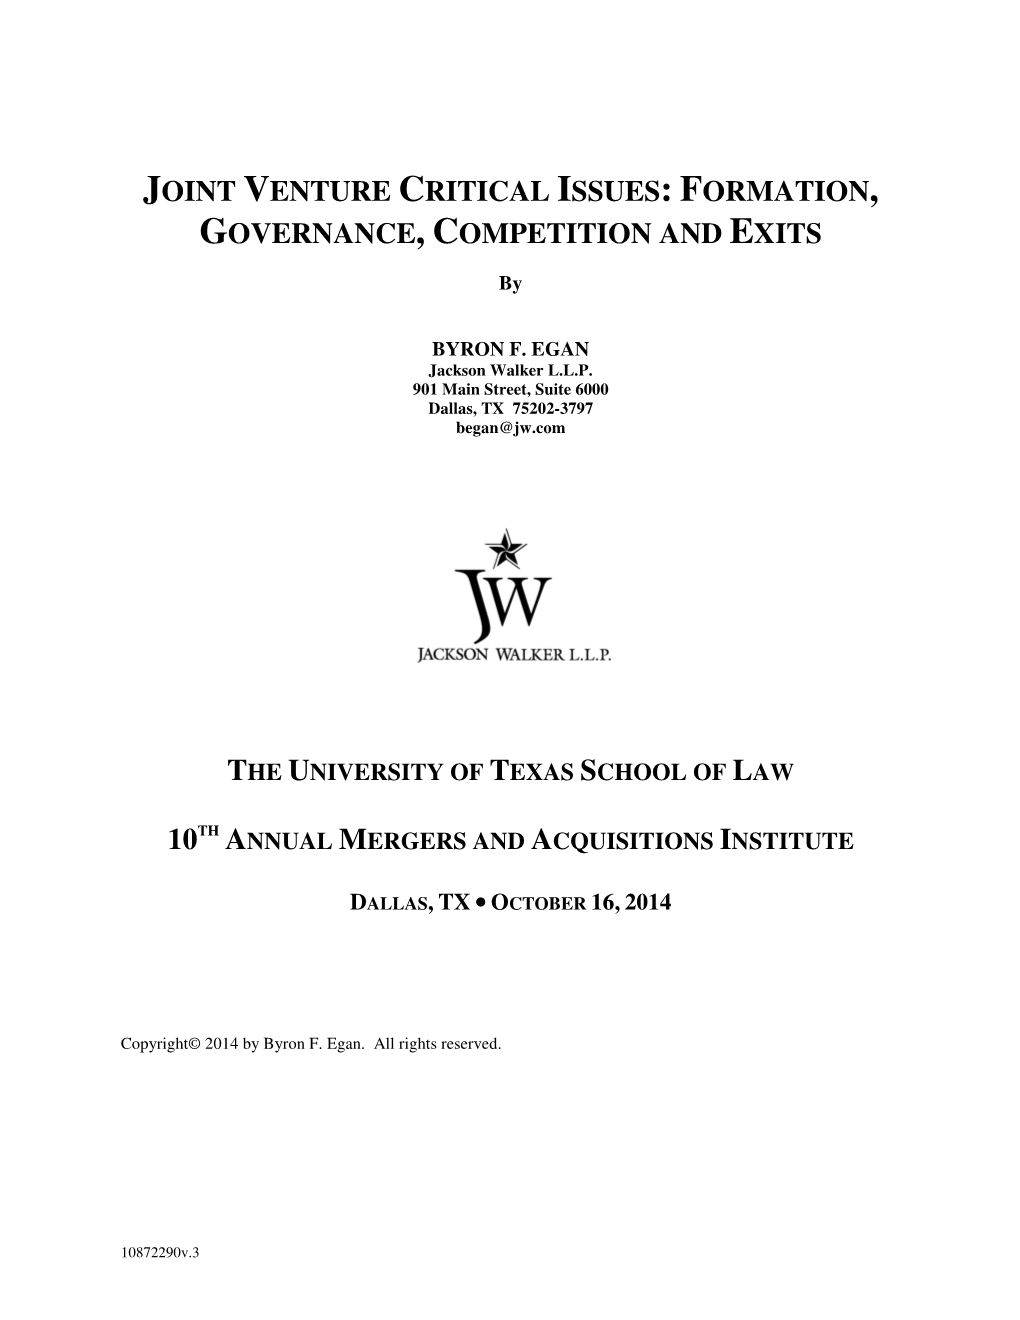 Joint Venture Critical Issues: Formation, Governance, Competition and Exits